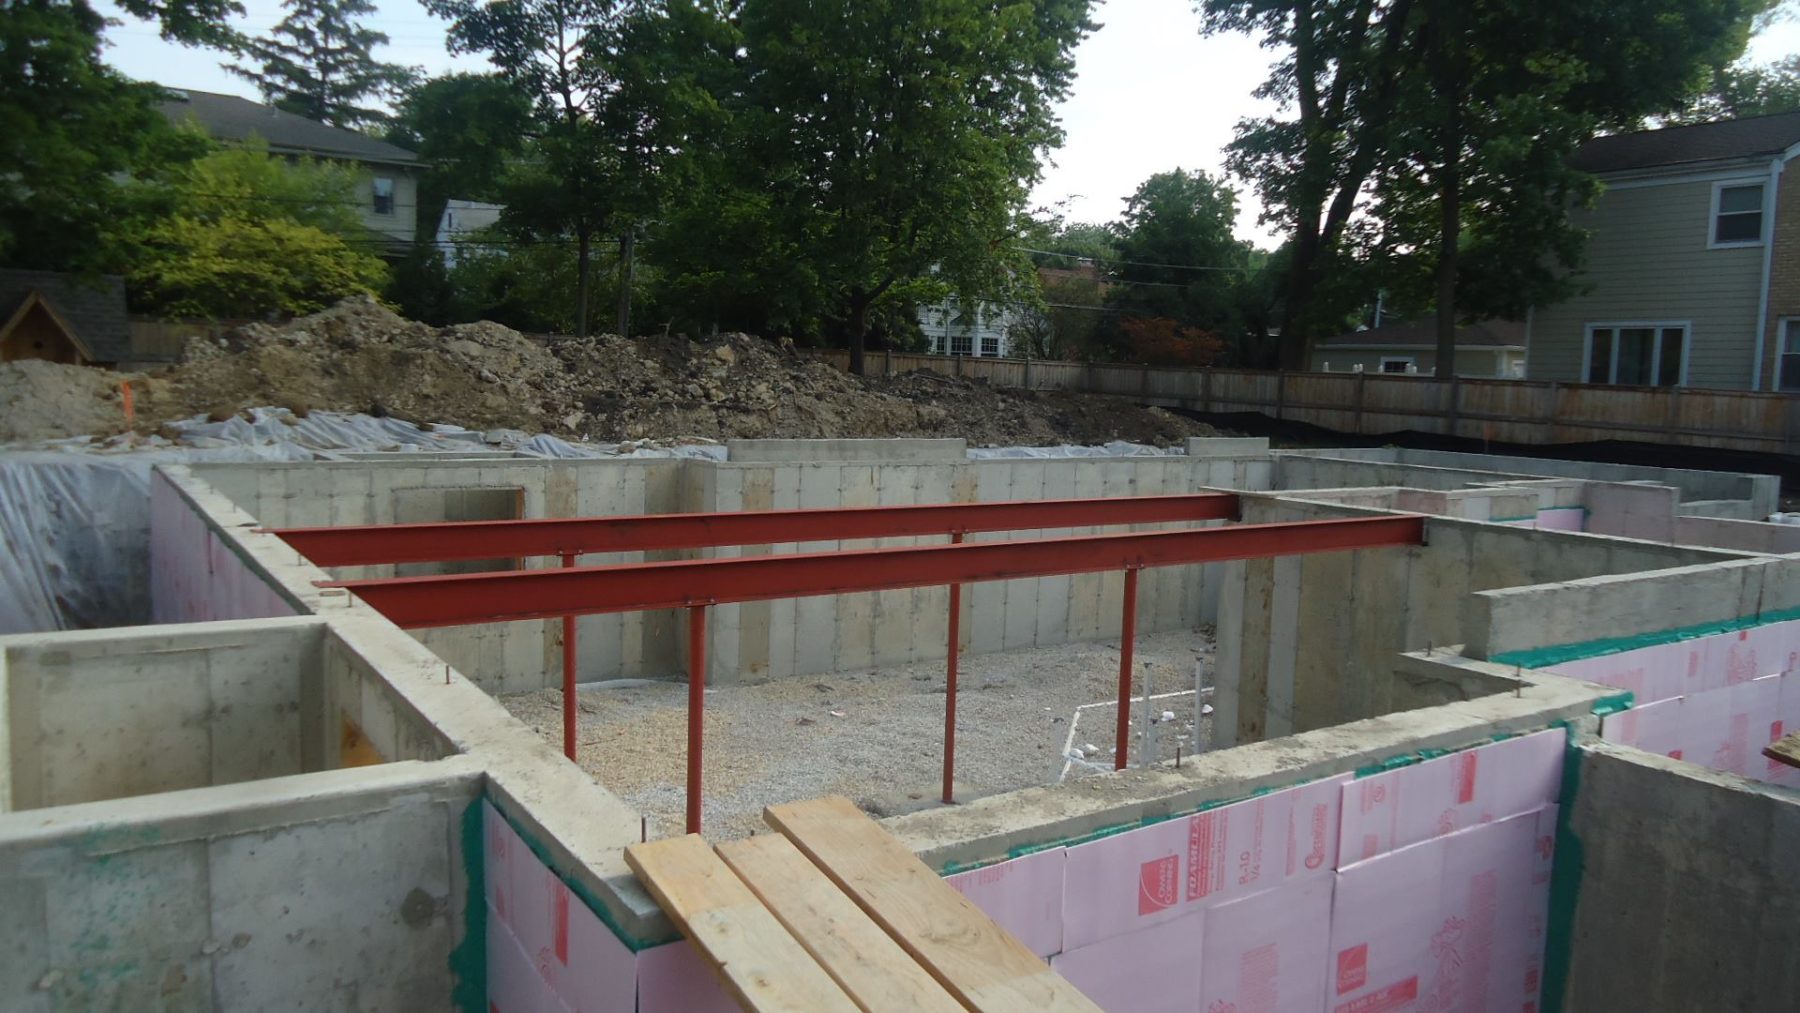 The Rub-R-Wall product has been applied to the Custom Home foundation